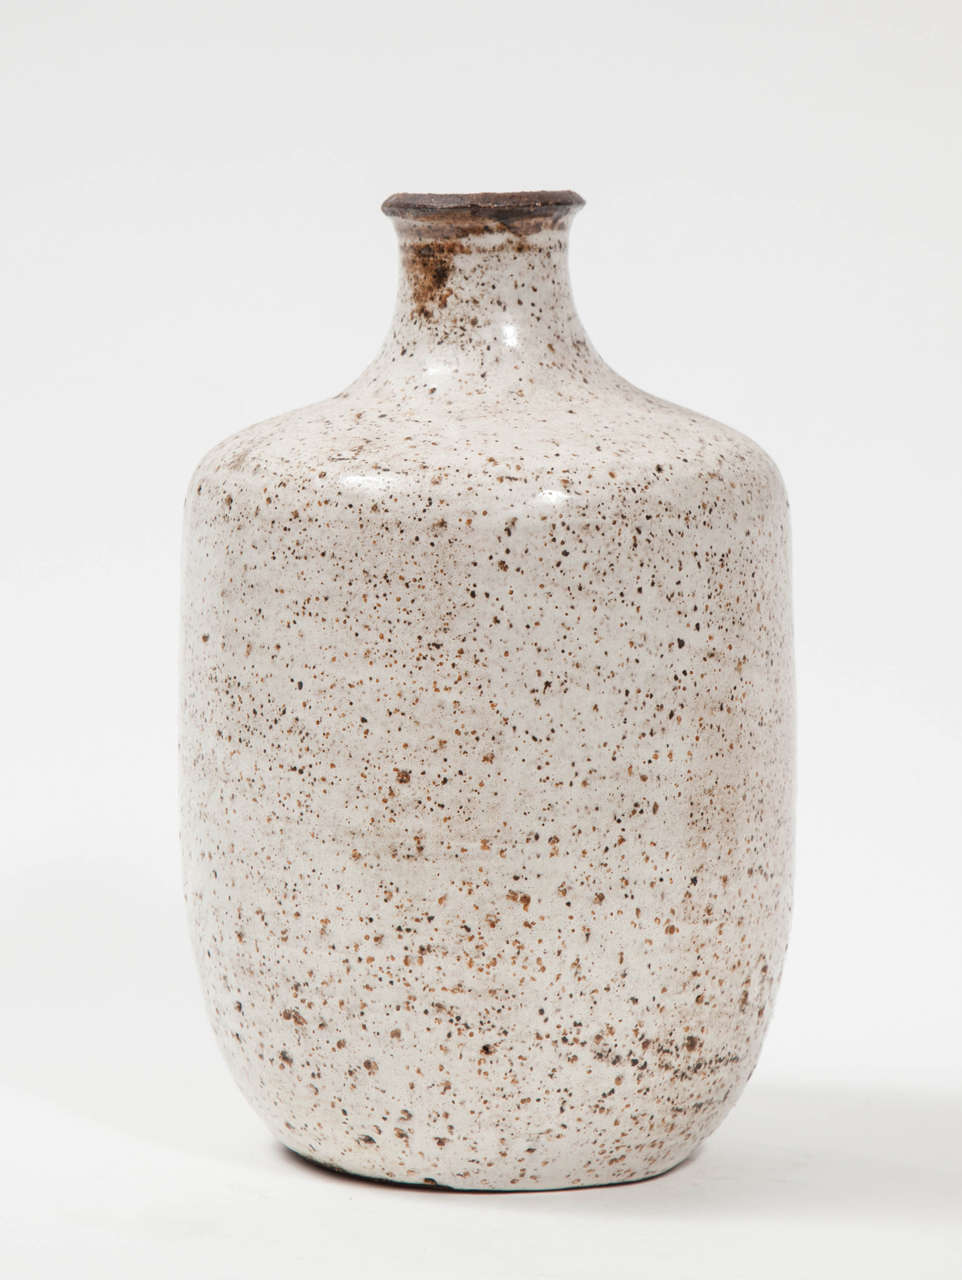 Reduction-fired Frans Wildenhain's wheel-thrown glazed stoneware bottle vase. In his pottery, Frans captured the spirit of the times in 1950's ceramics - a period rich in curves, color, abstract design, simplicity, utility, earth tones, and